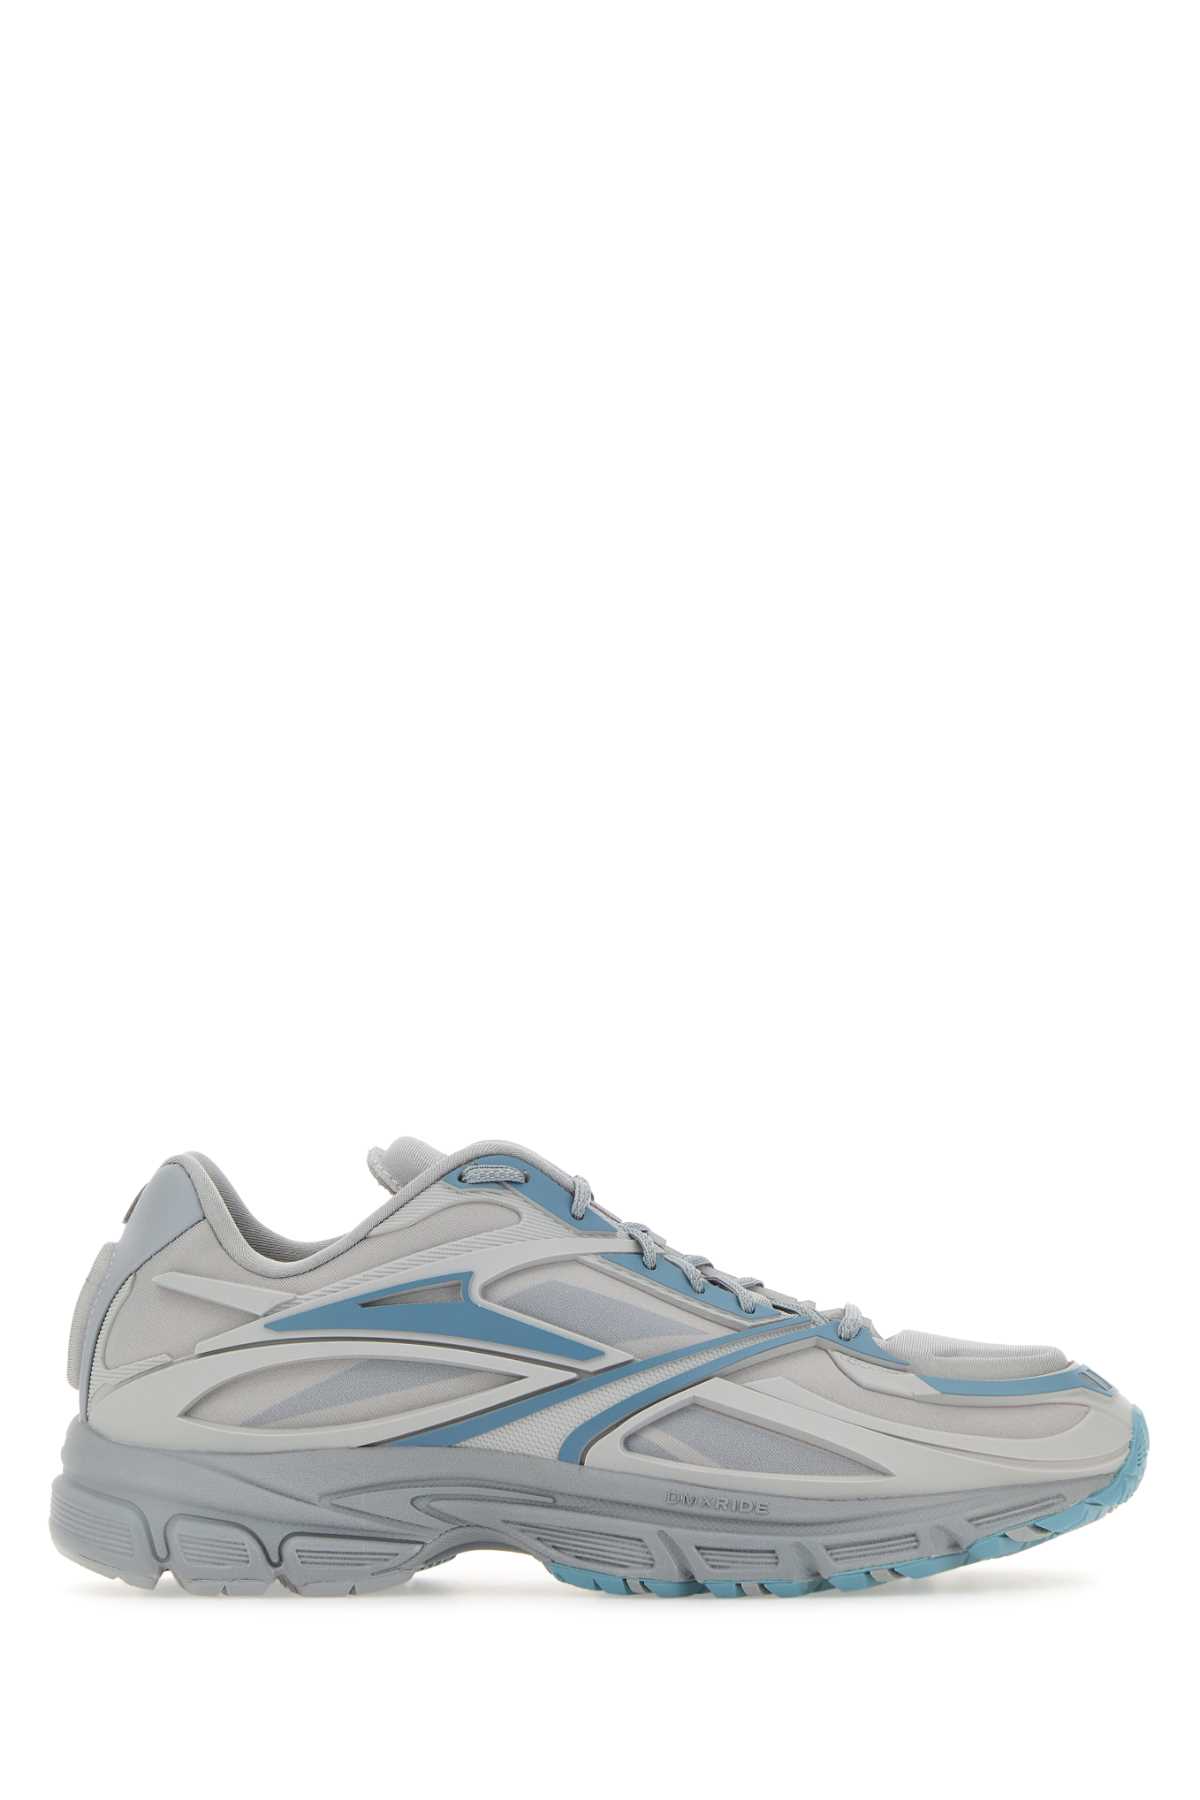 Shop Reebok Multicolor Fabric And Rubber Premier Road Modern Sneakers In Grey